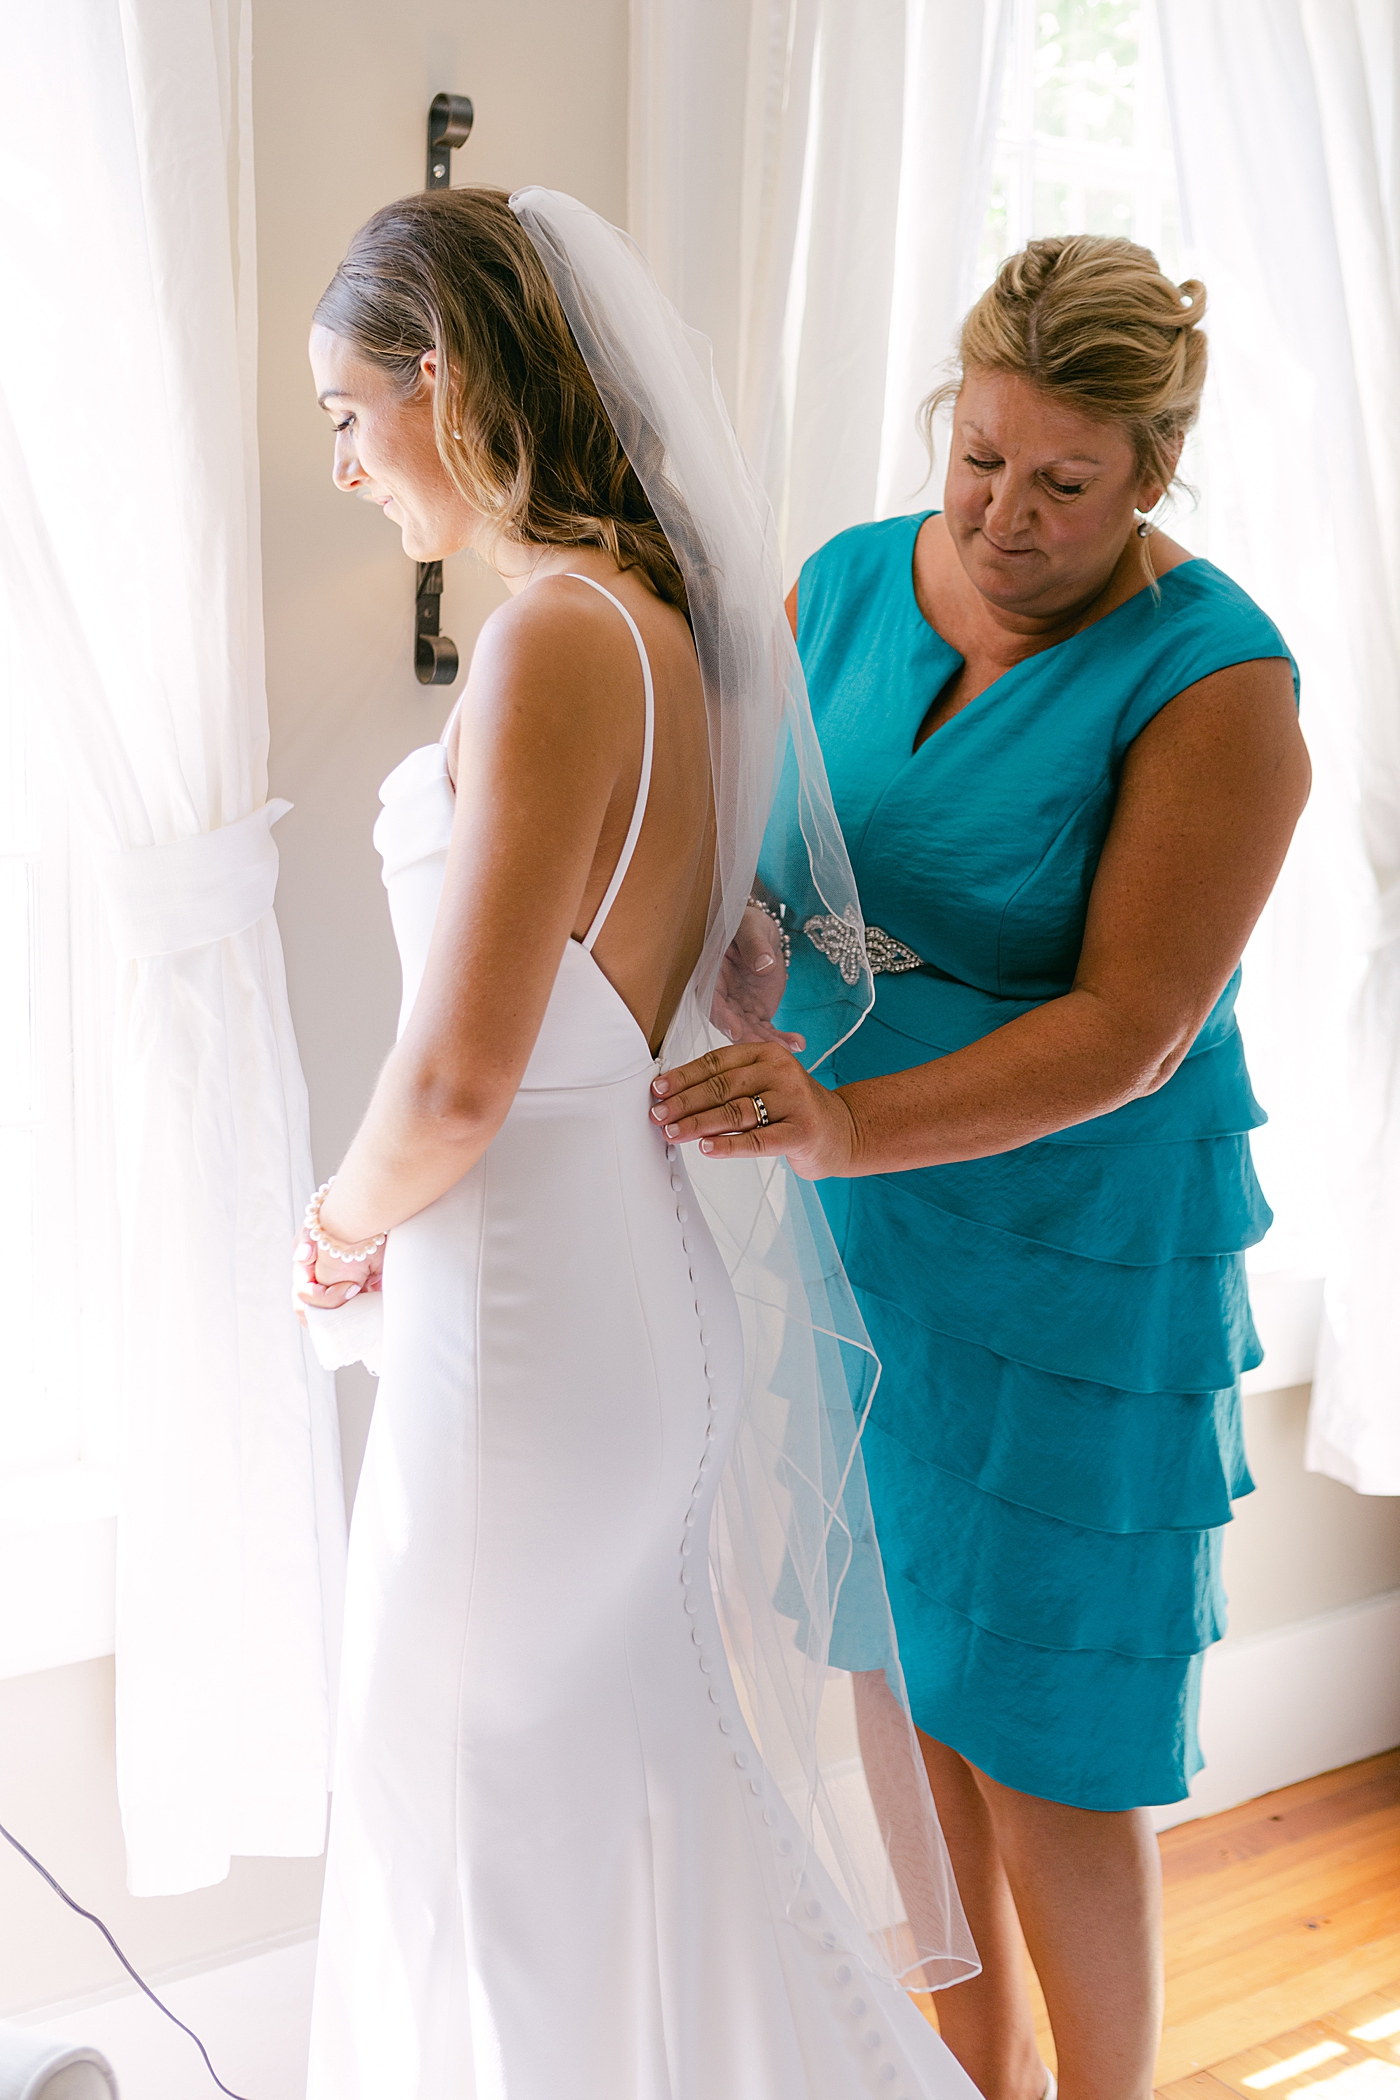 Bride being helped into her dress | Image by Hope Helmuth Photography